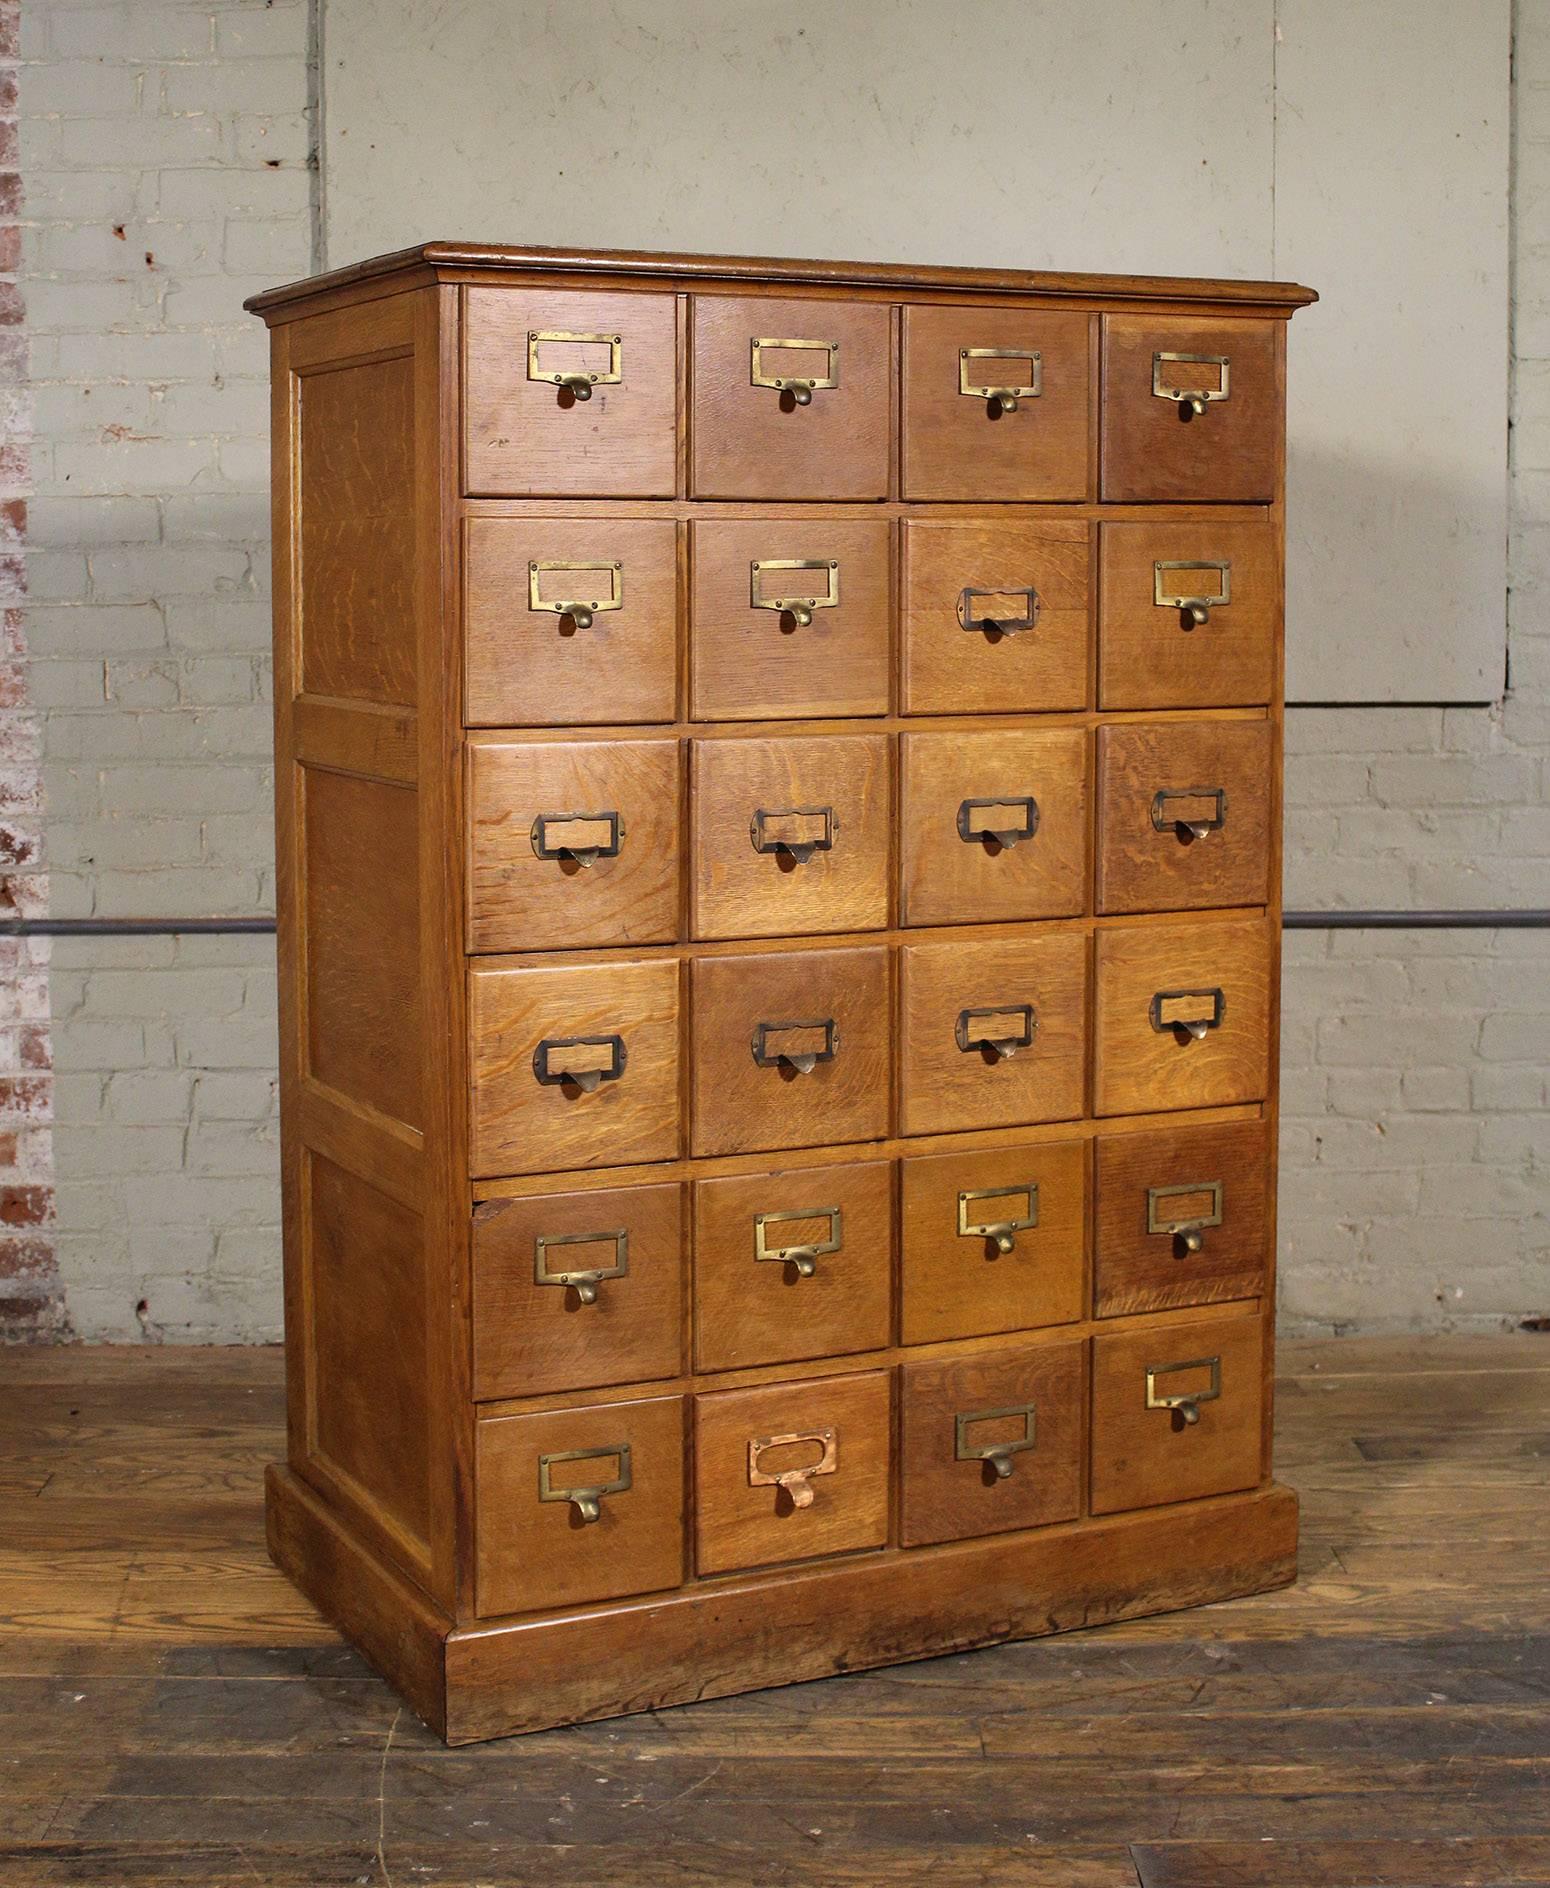 Vintage Industrial multi-drawer oakwood storage cabinet. Overall dimensions are 36 1/4" in width, 21 5/8" in depth and 51 3/4" in height. Inside drawer dimensions are 6 7/8" in width, 6 1/2" in height and 18" in depth.